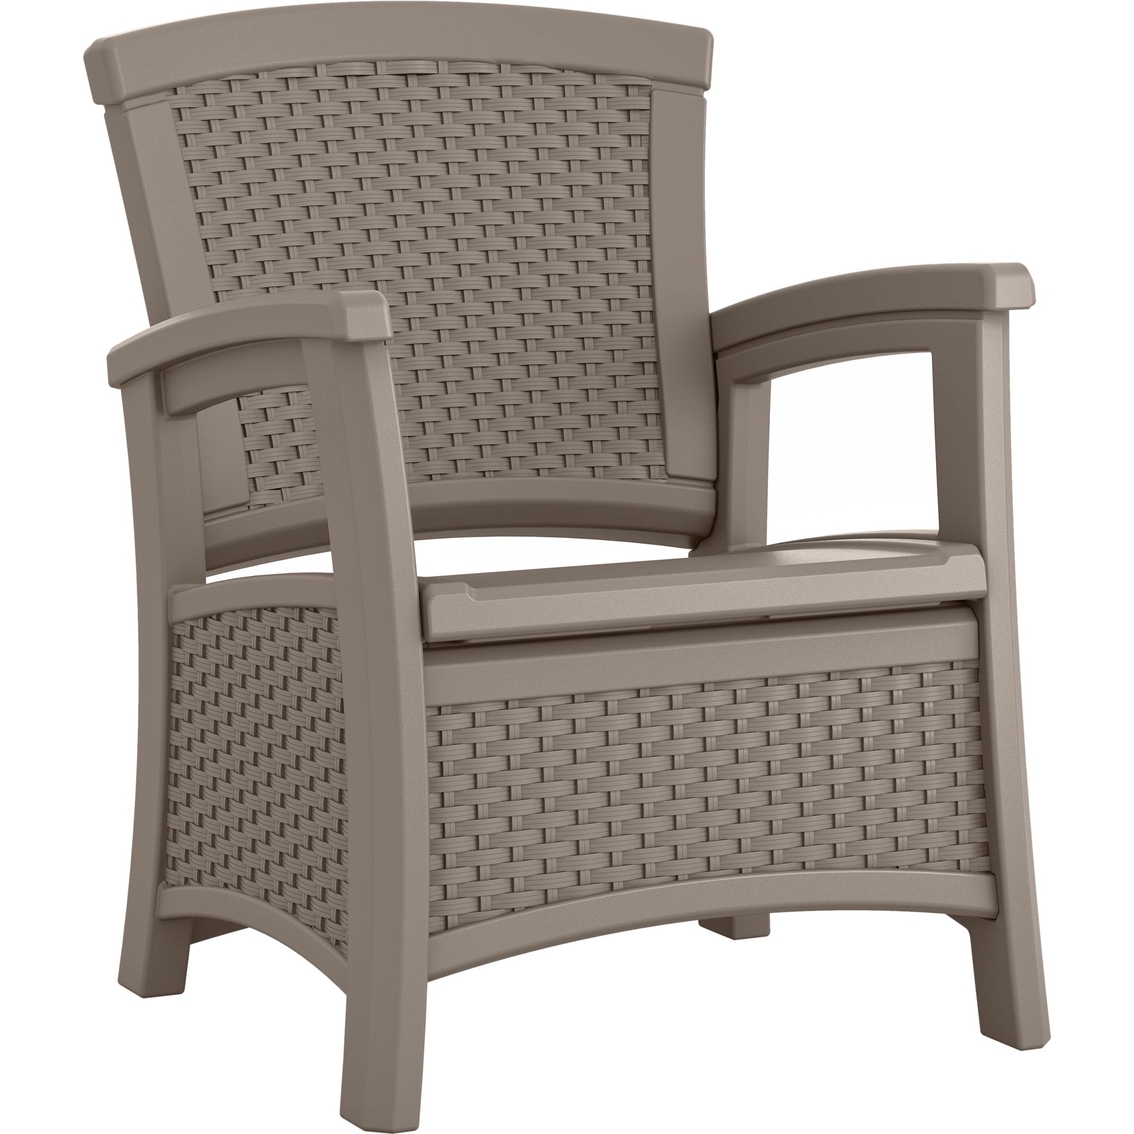 Suncast Elements Club Chair With Storage Tables Chairs More